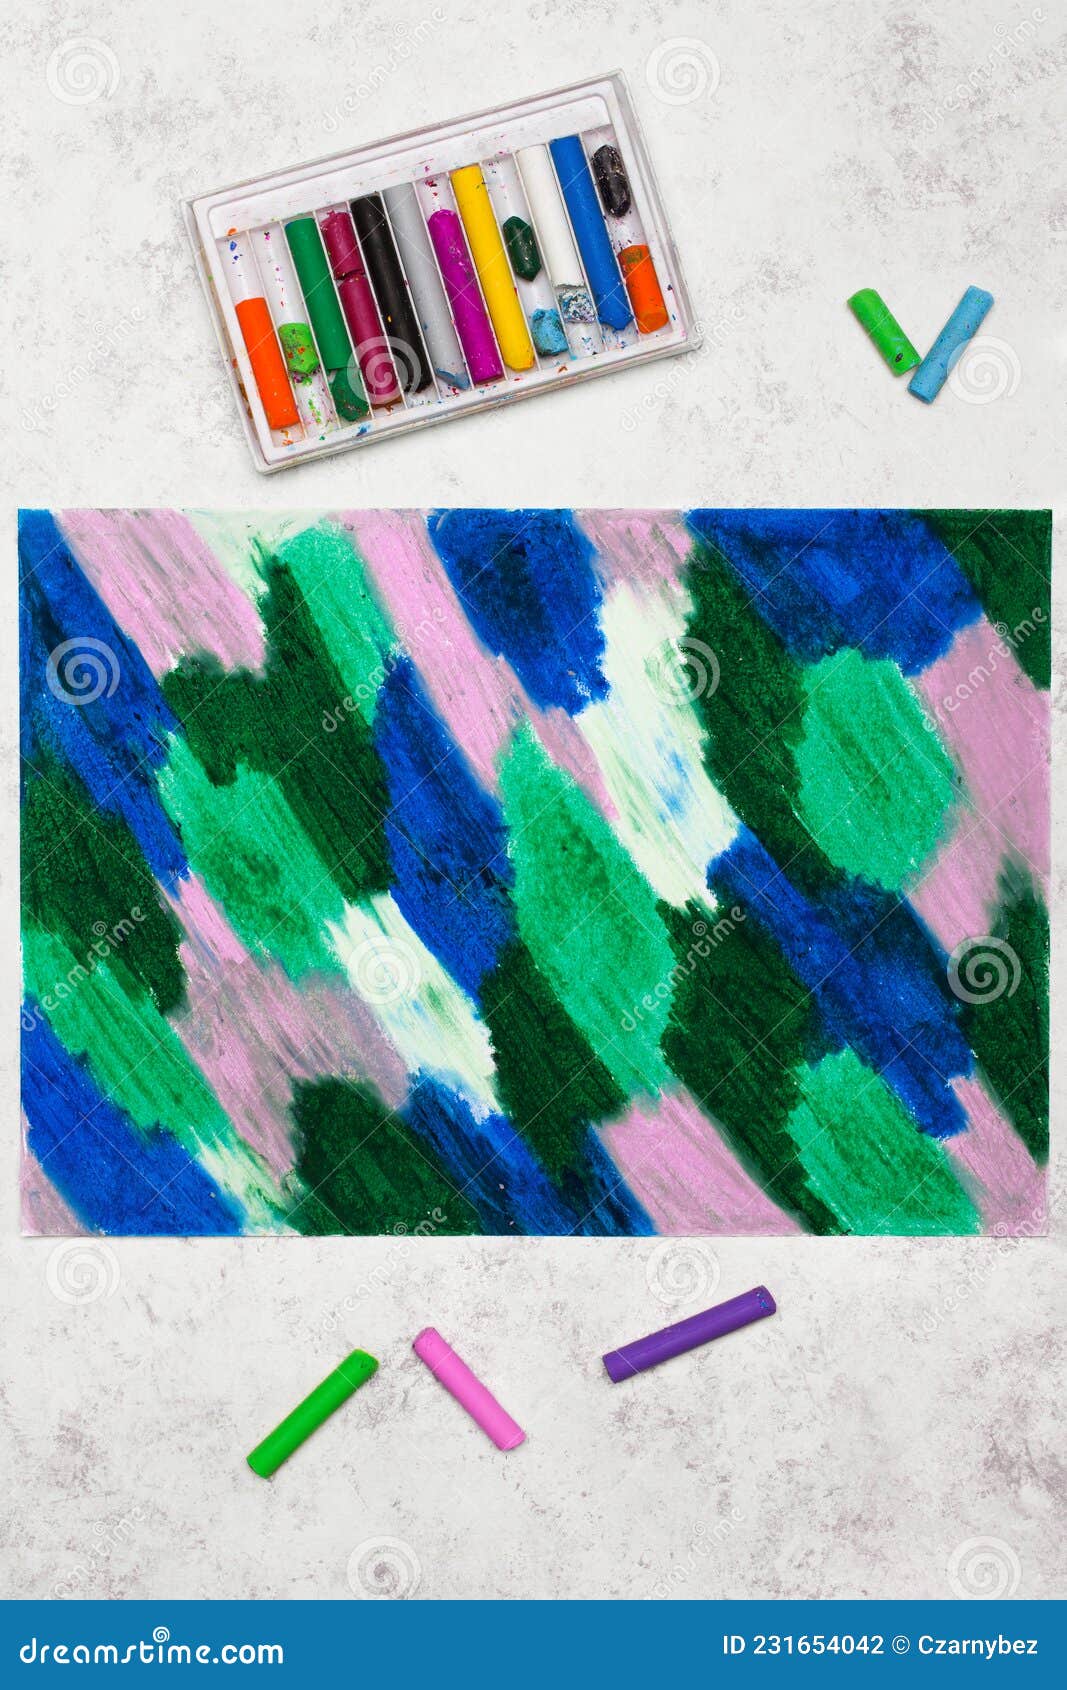 Oil pastel crayons Stock Photo by ©shirotie 63371203